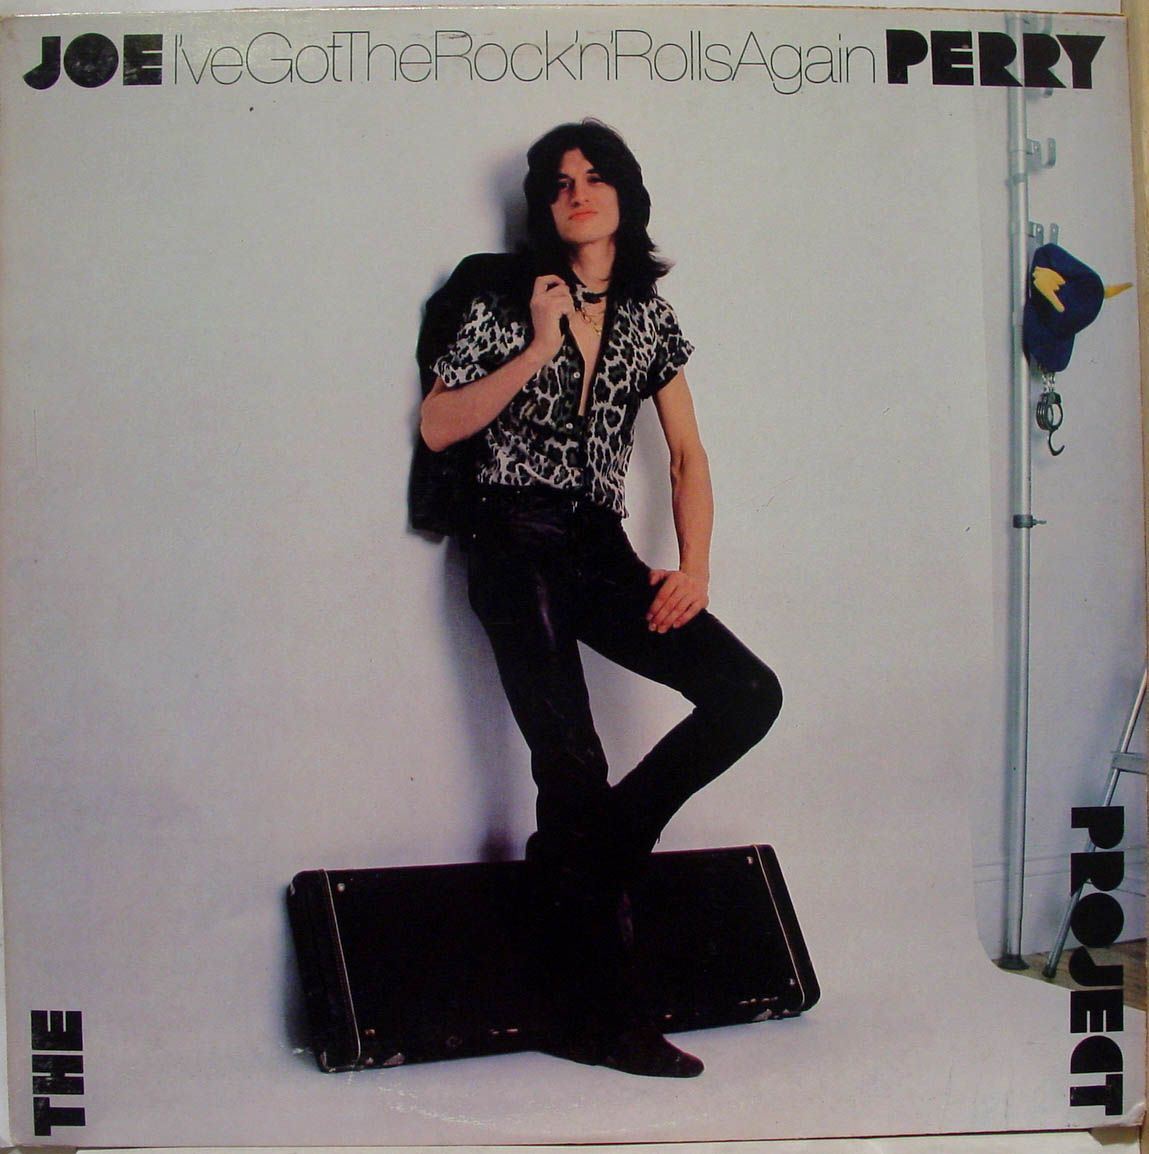 THE JOE PERRY PROJECT ive got the rock n rolls again LP VG+ FC 37364